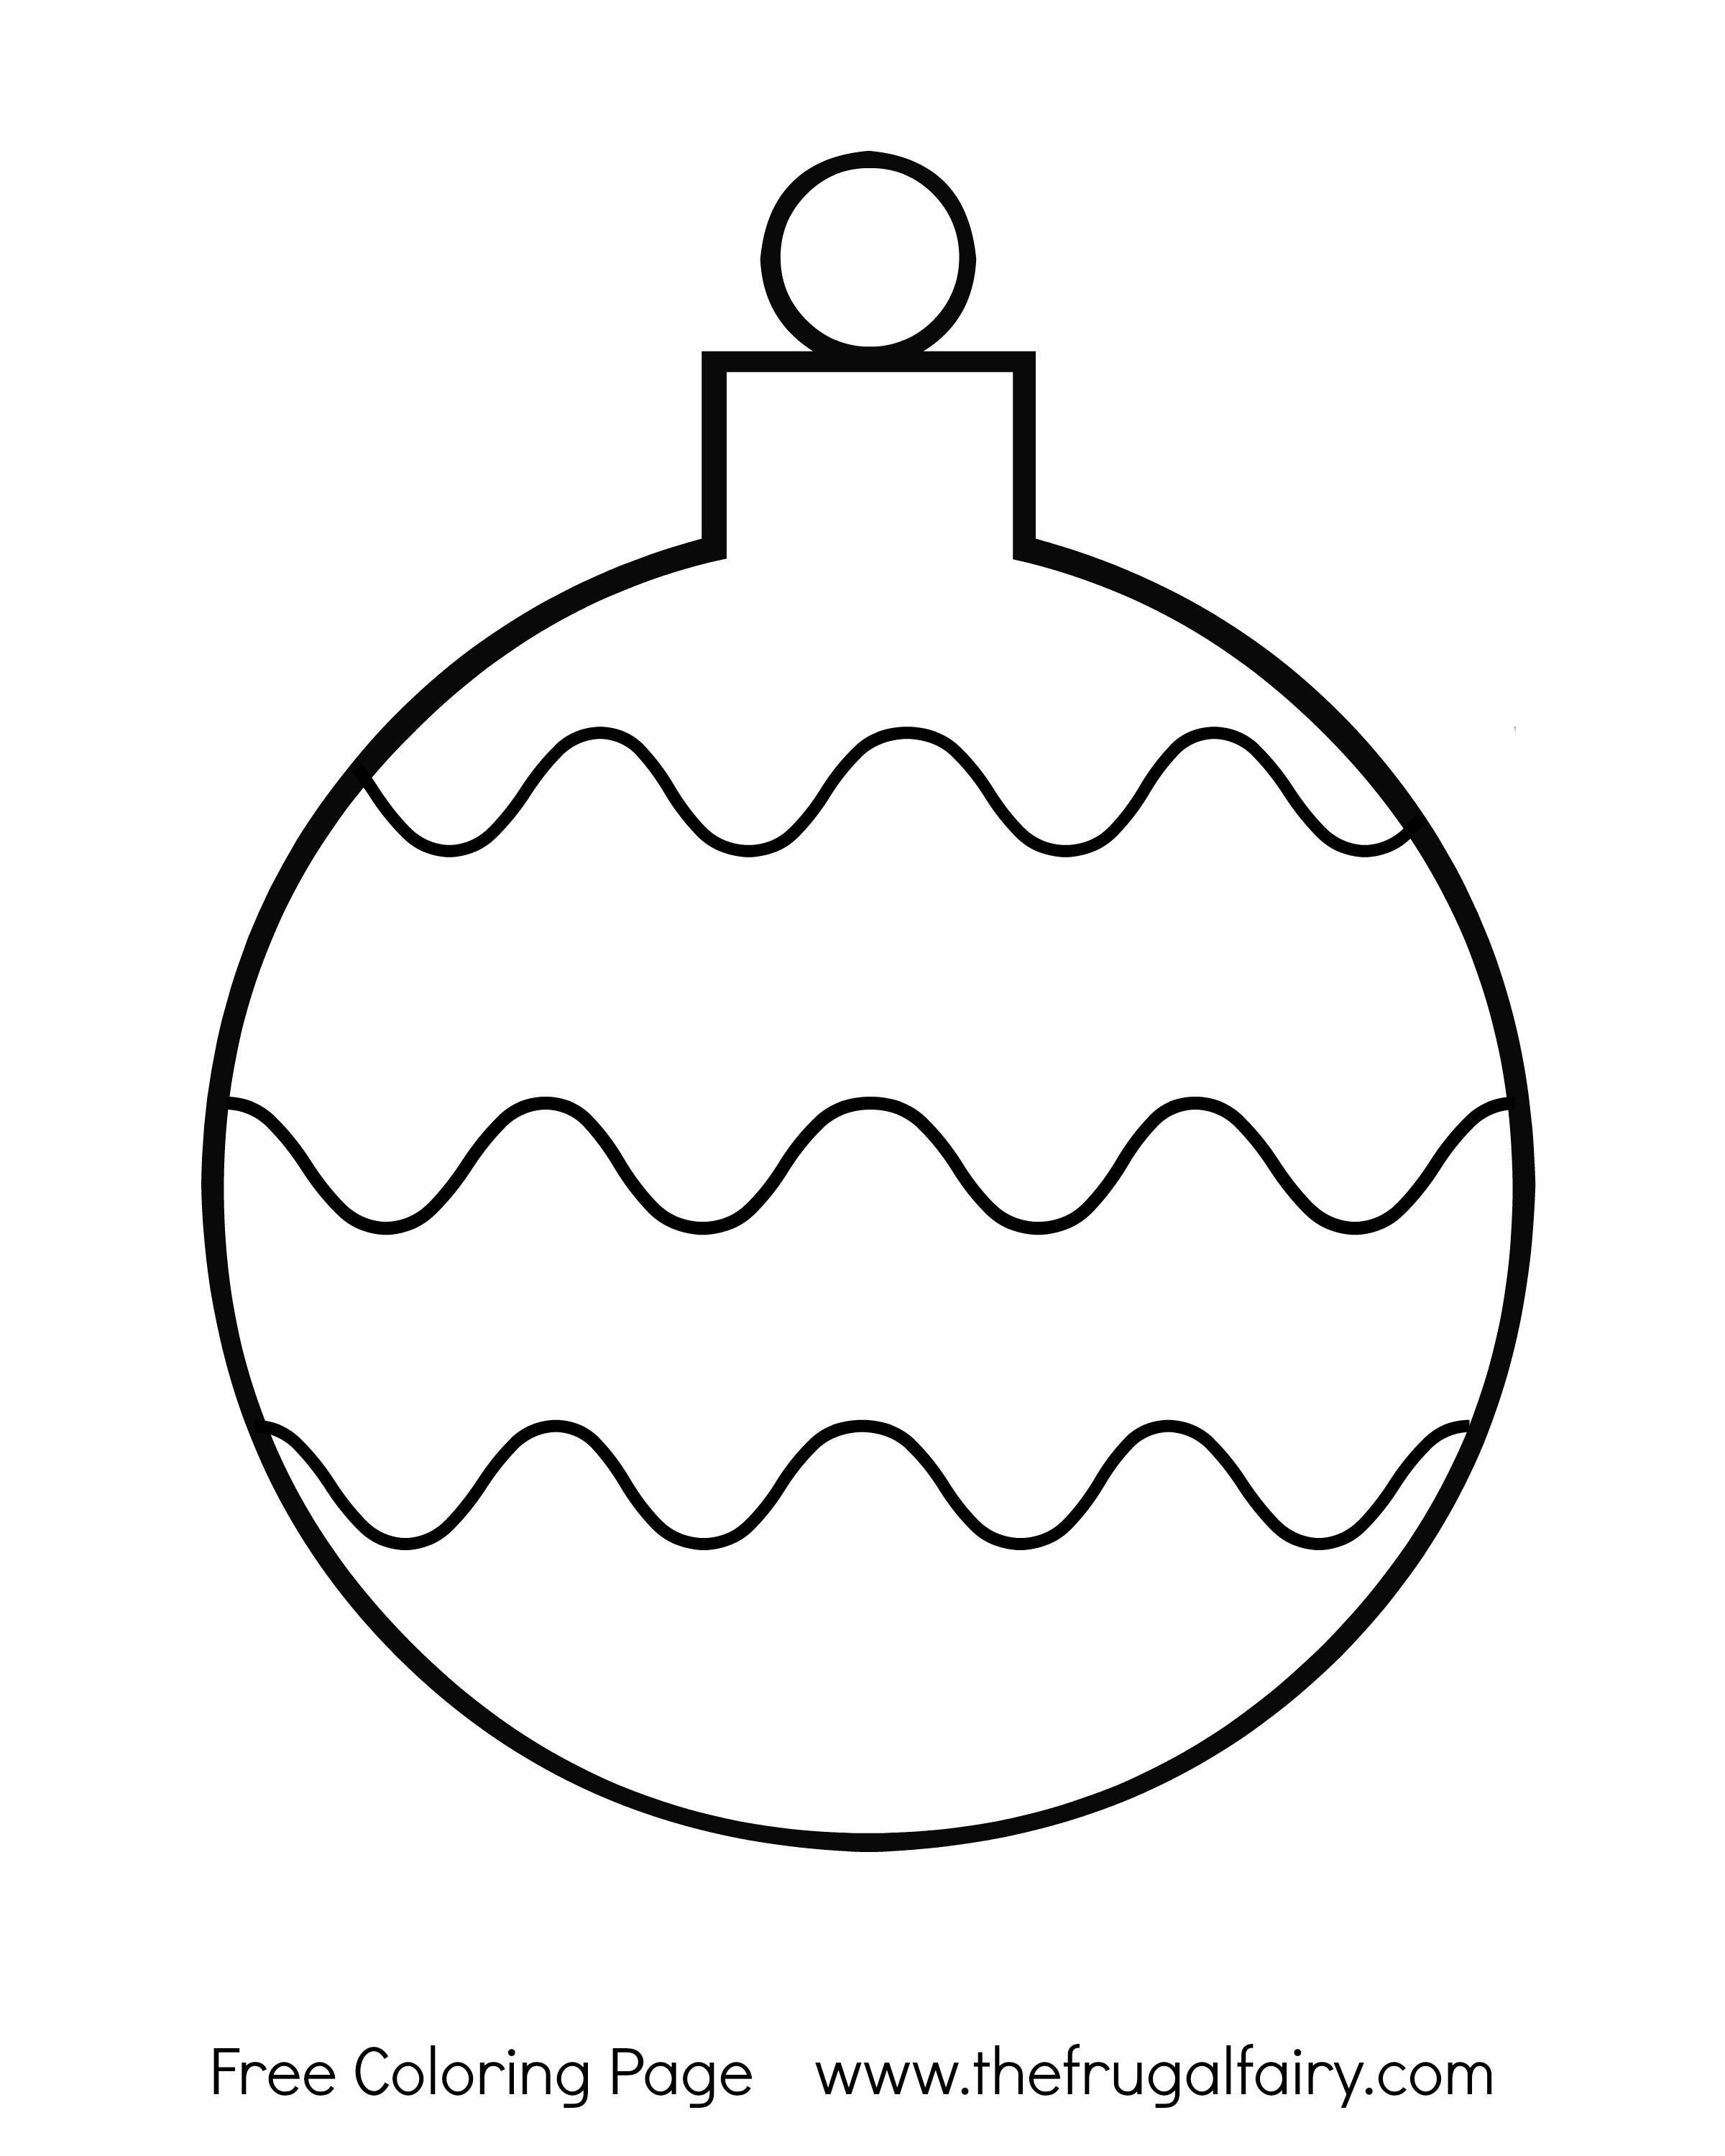 Printable Ornament Coloring Pages at GetColorings com Free printable